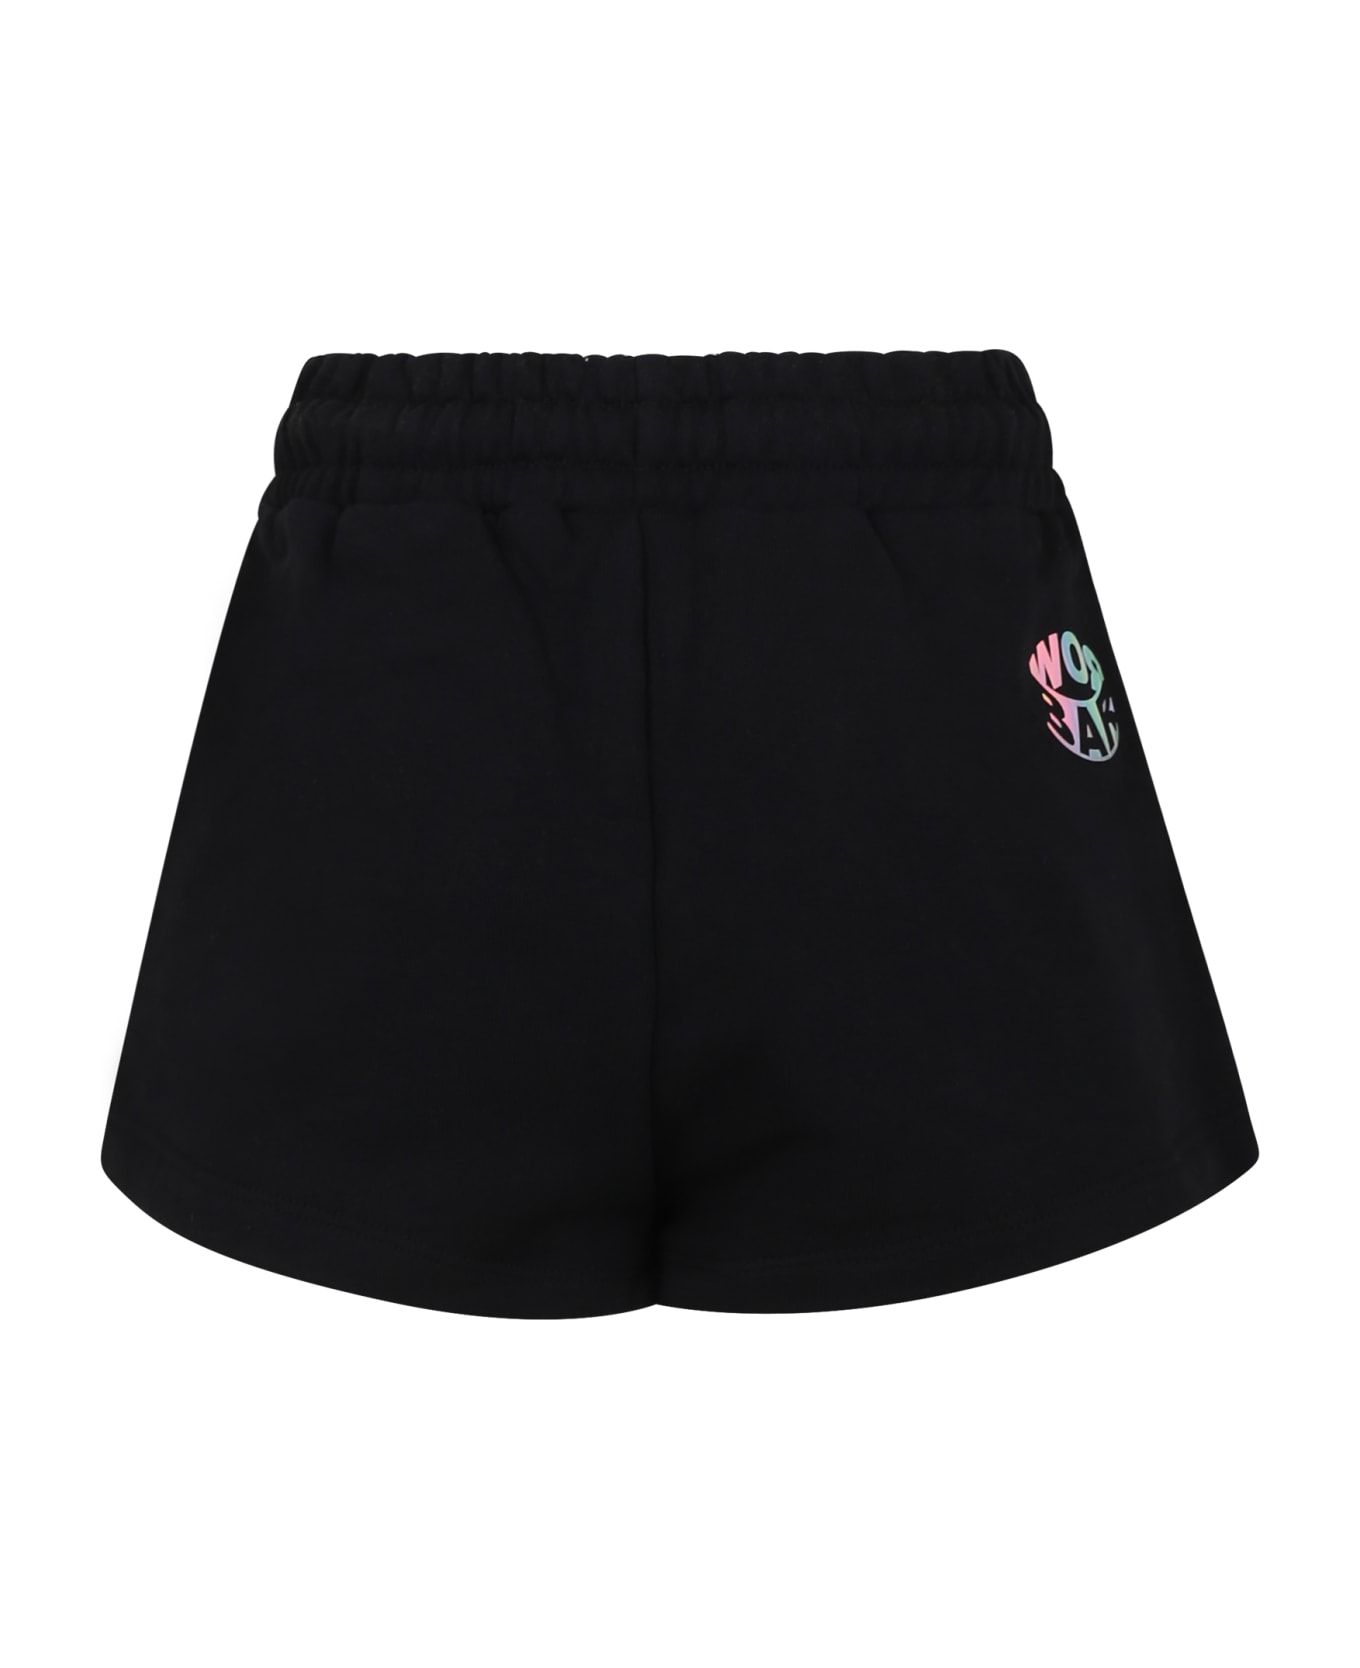 Barrow Black Shorts For Girl With Smiley Faces - Black